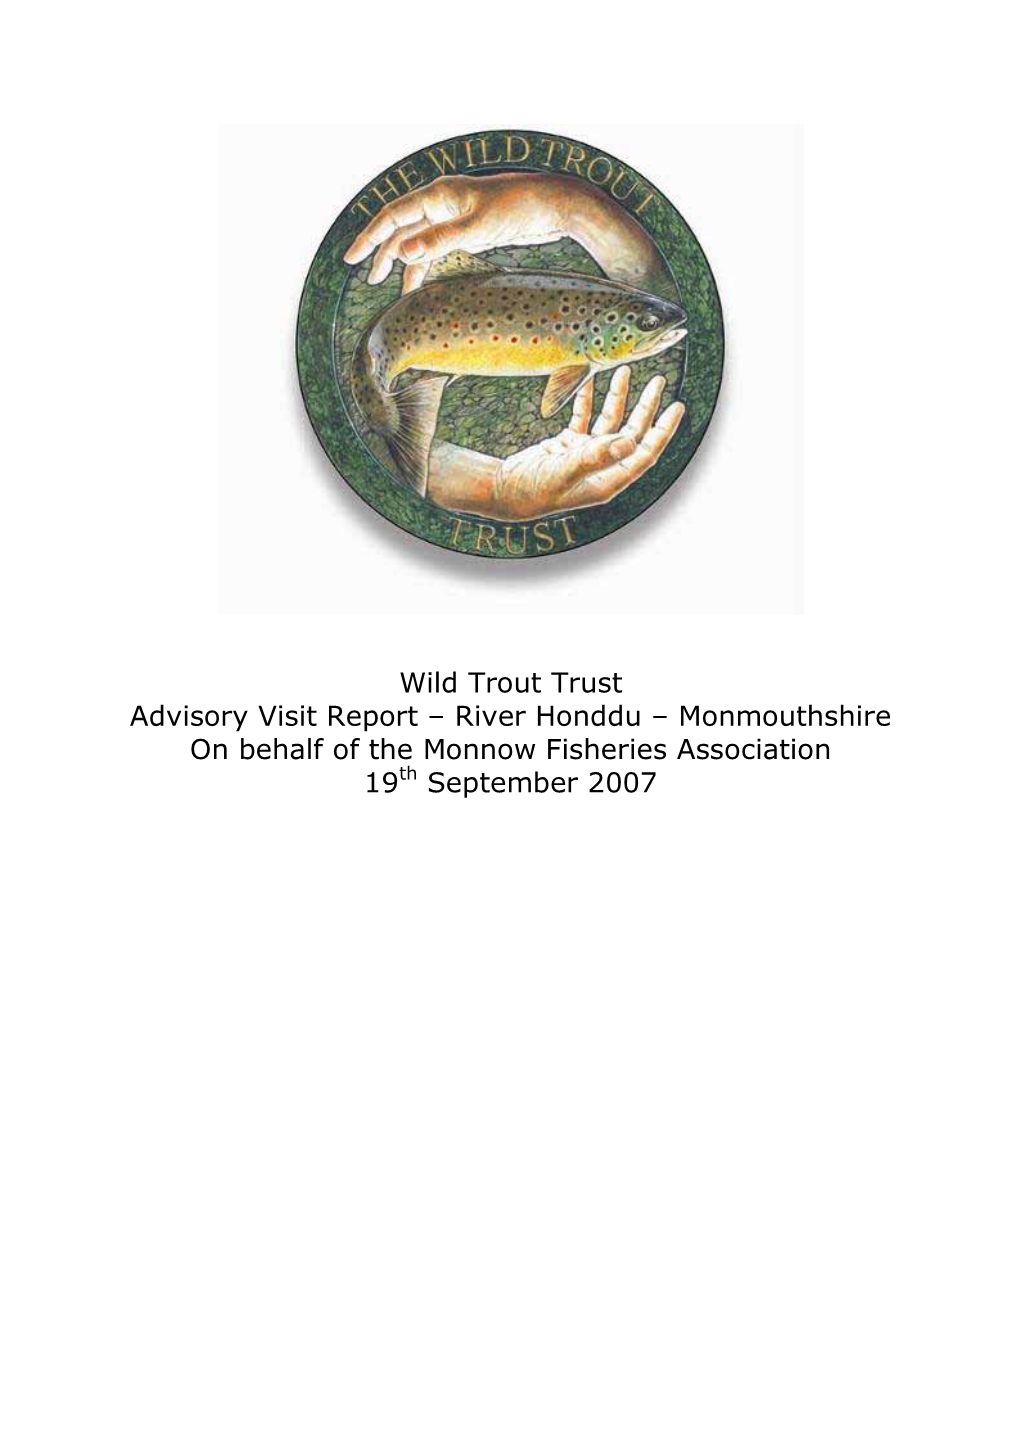 Wild Trout Trust Advisory Visit Report – River Honddu – Monmouthshire on Behalf of the Monnow Fisheries Association 19Th September 2007